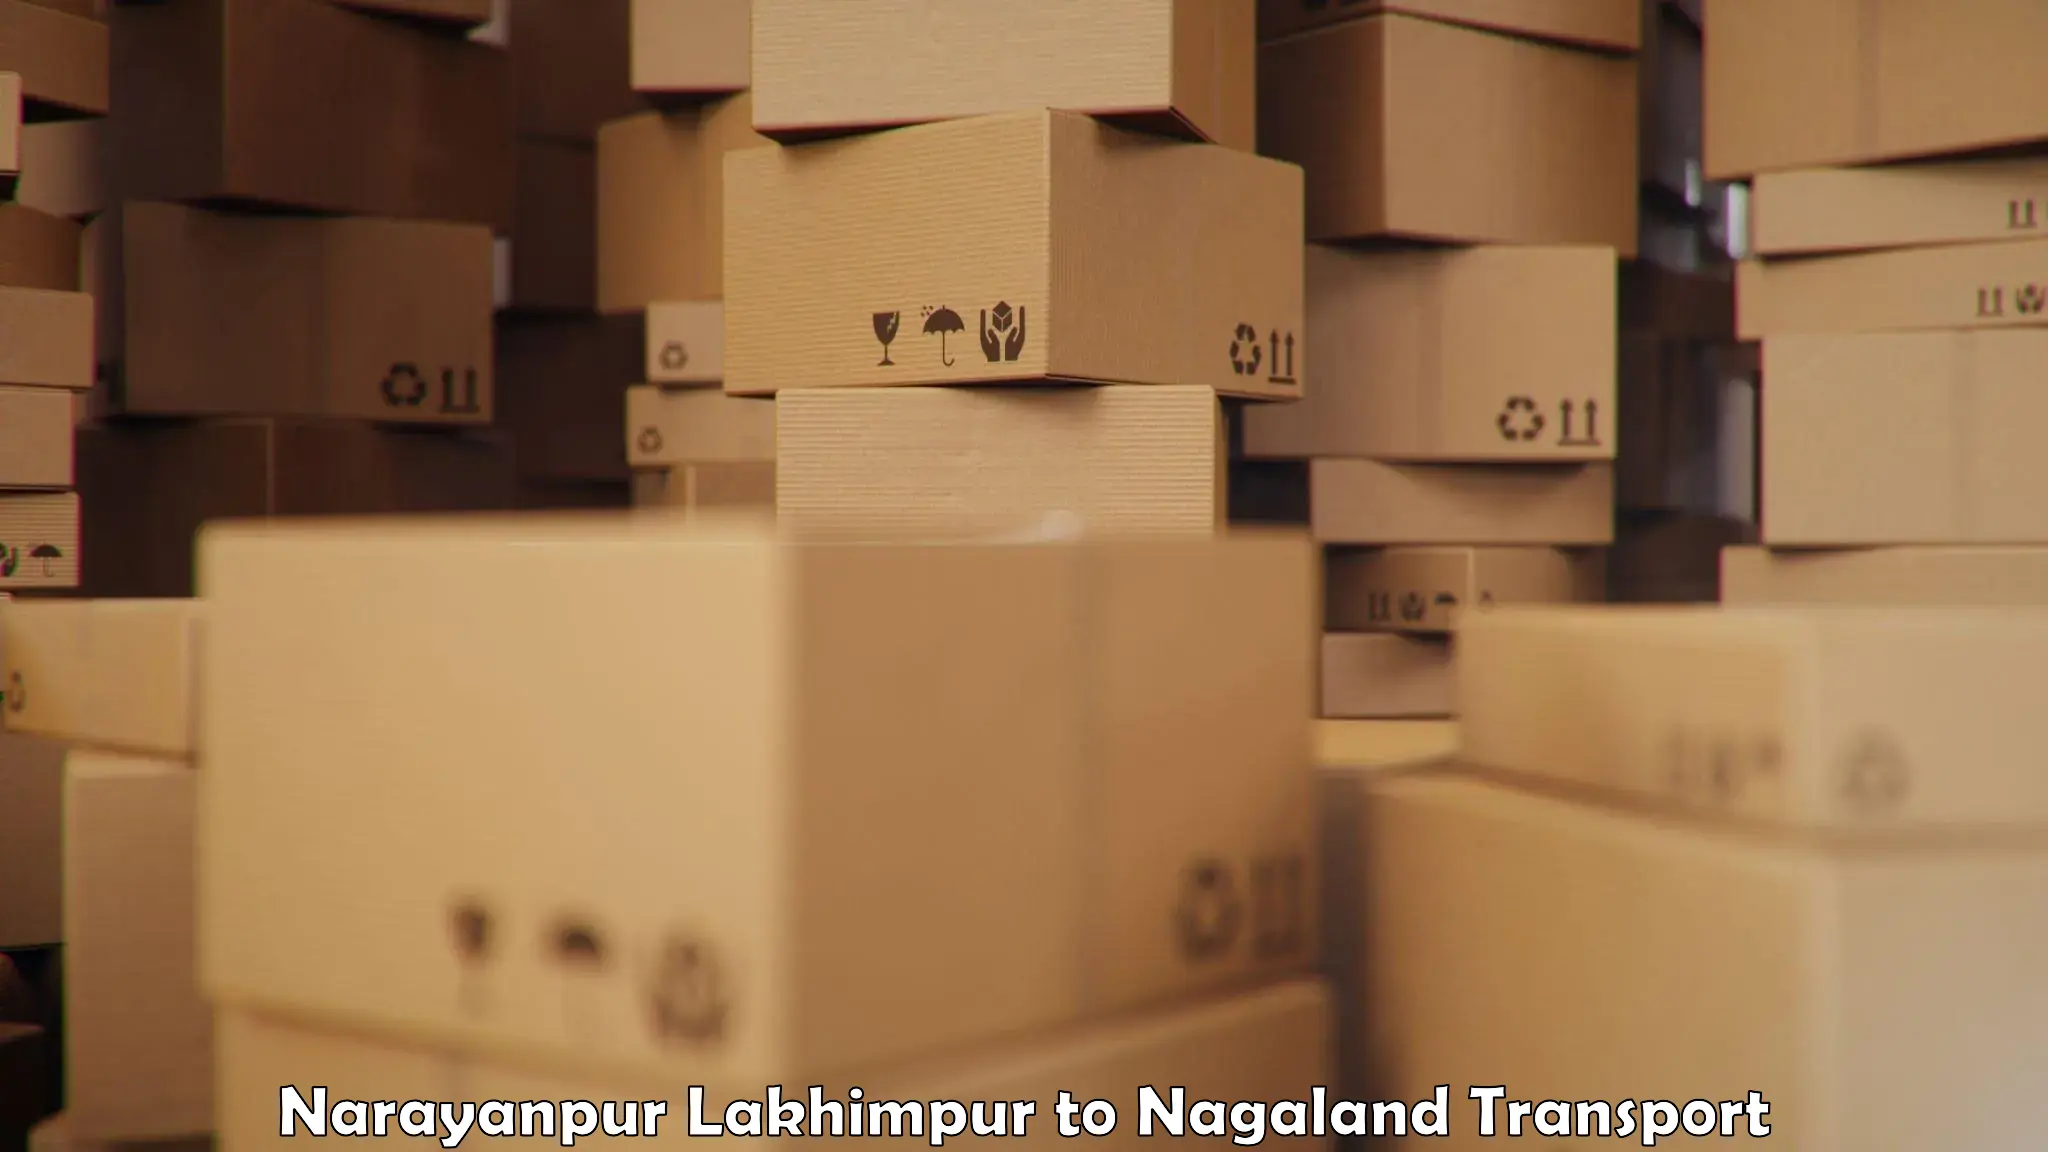 Commercial transport service Narayanpur Lakhimpur to Dimapur